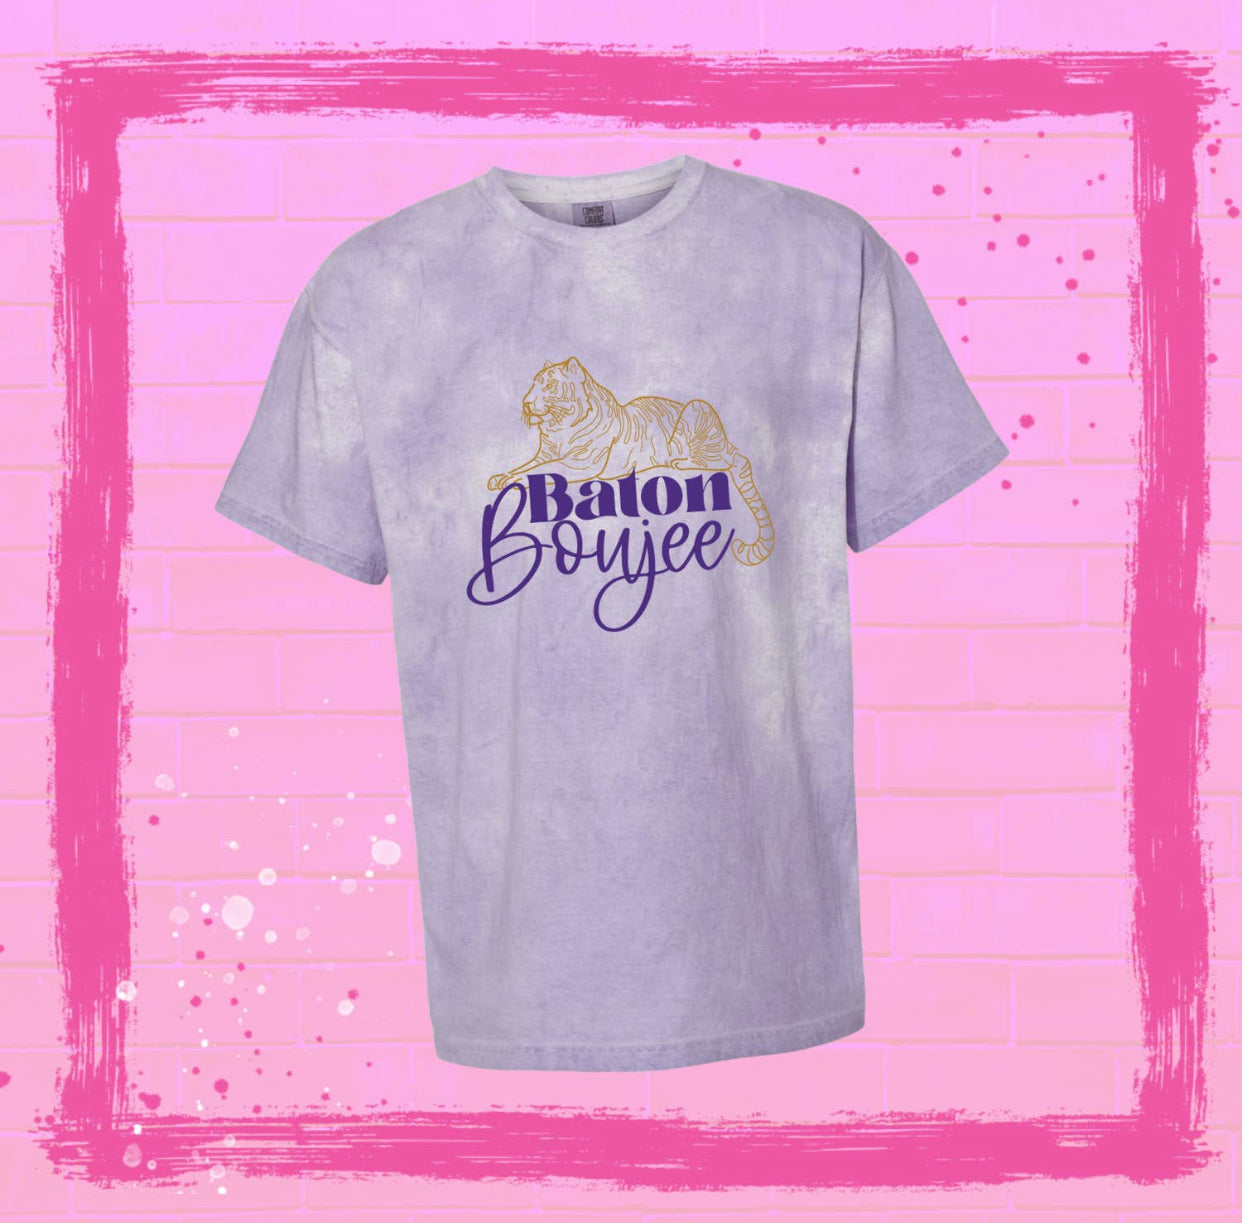 Purple tie dye shirt. Graphic of a line drawing tiger in gold with the words Baton Boujee underneath in purple with Boujee in cursive.